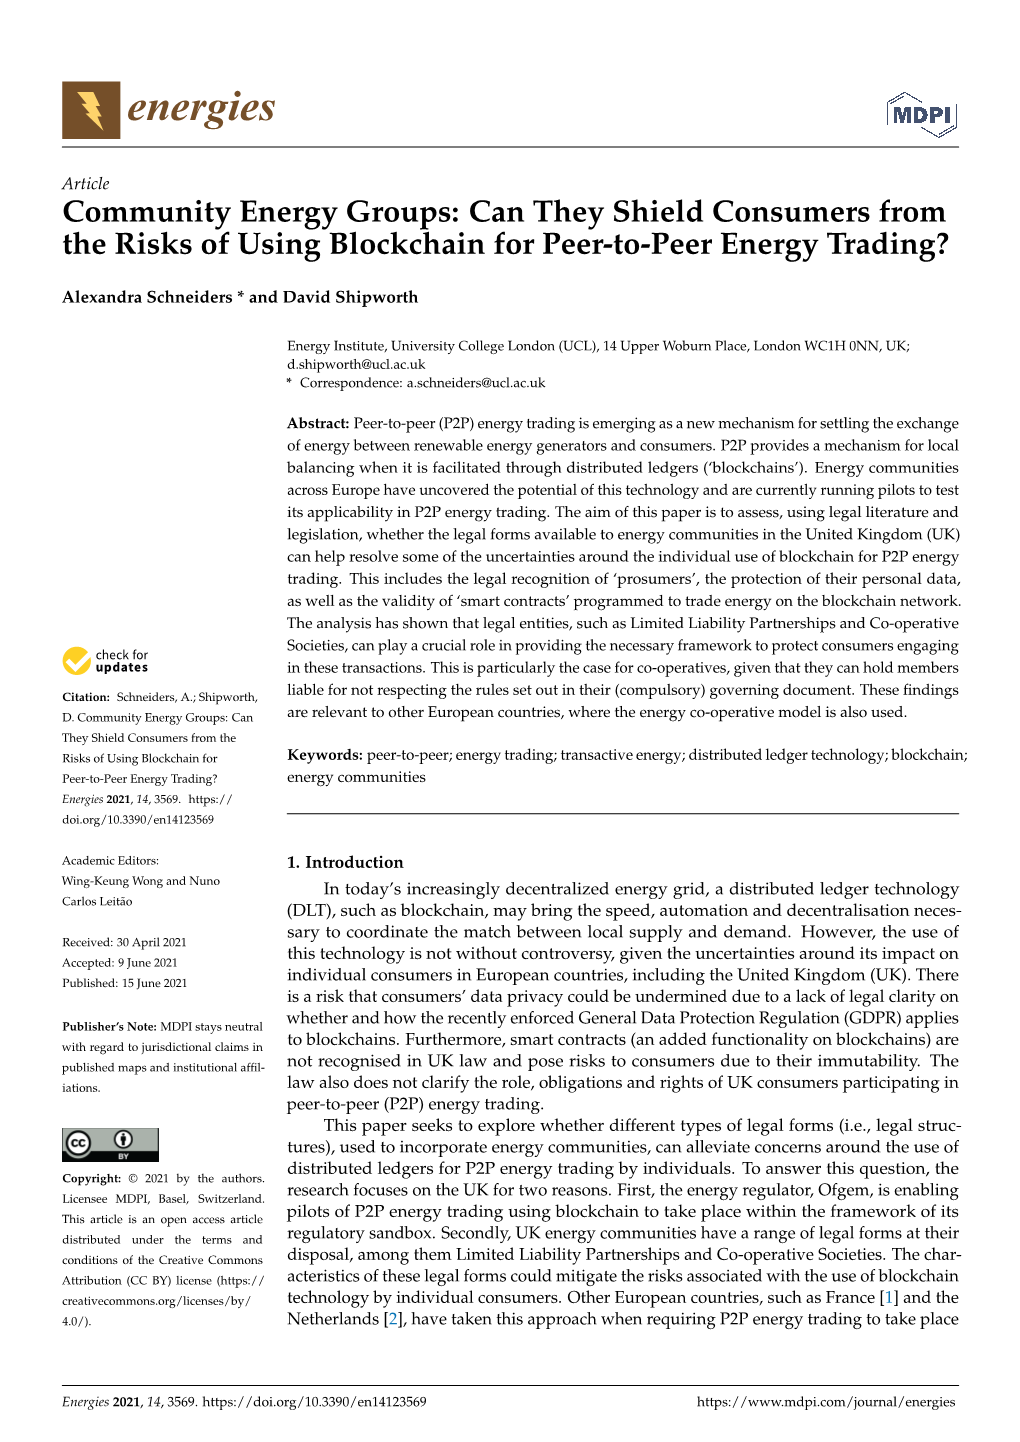 Can They Shield Consumers from the Risks of Using Blockchain for Peer-To-Peer Energy Trading?